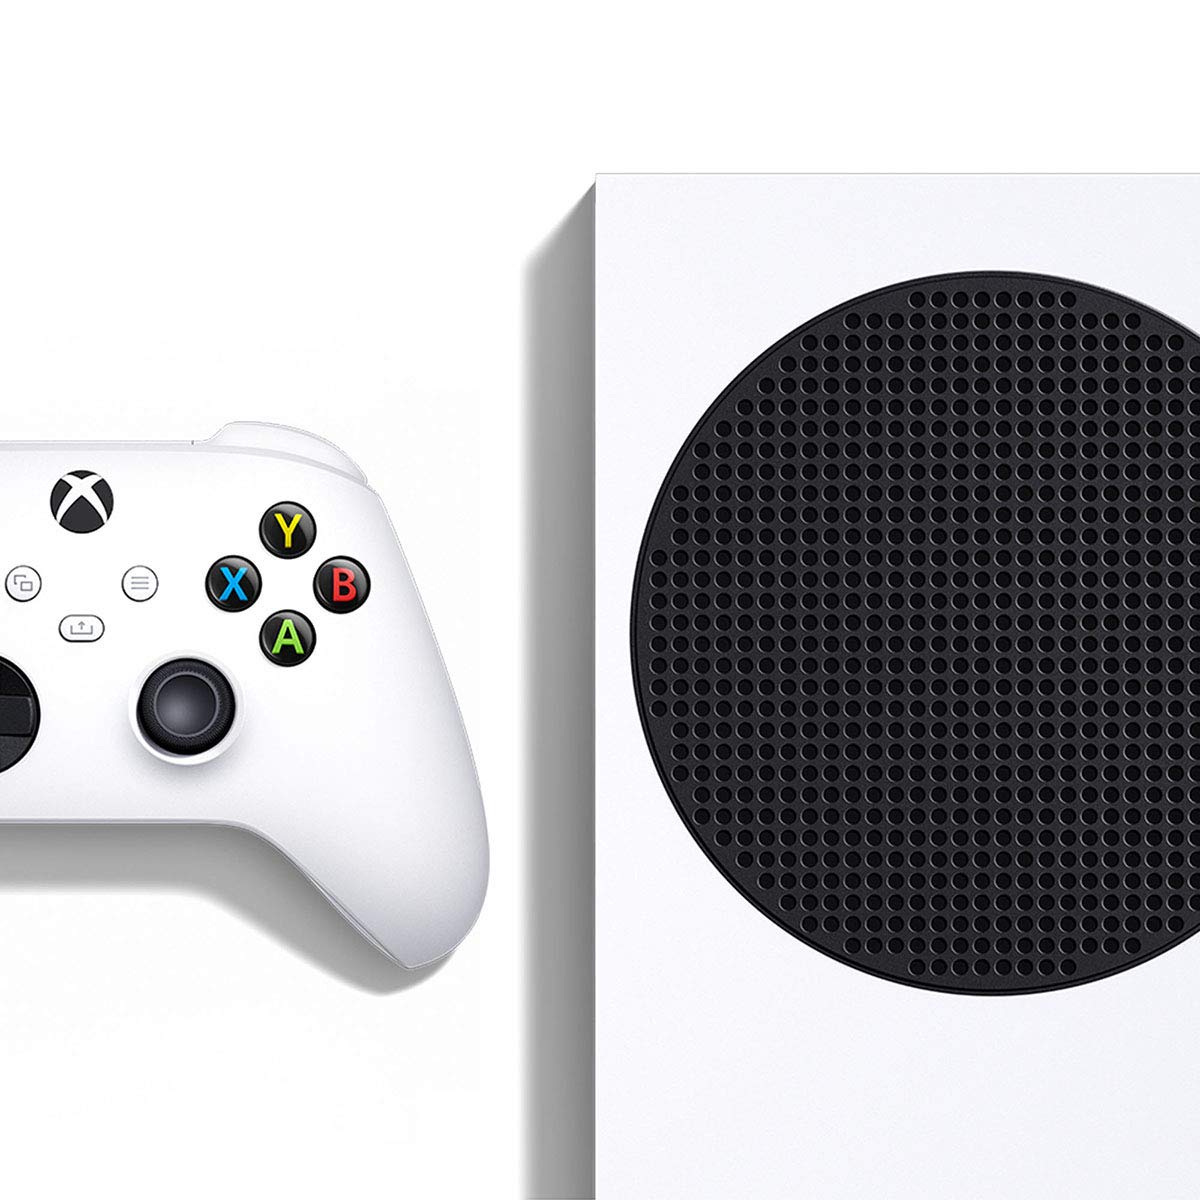 2020 New Xbox 512GB SSD Console -Robot White - image 3 of 7